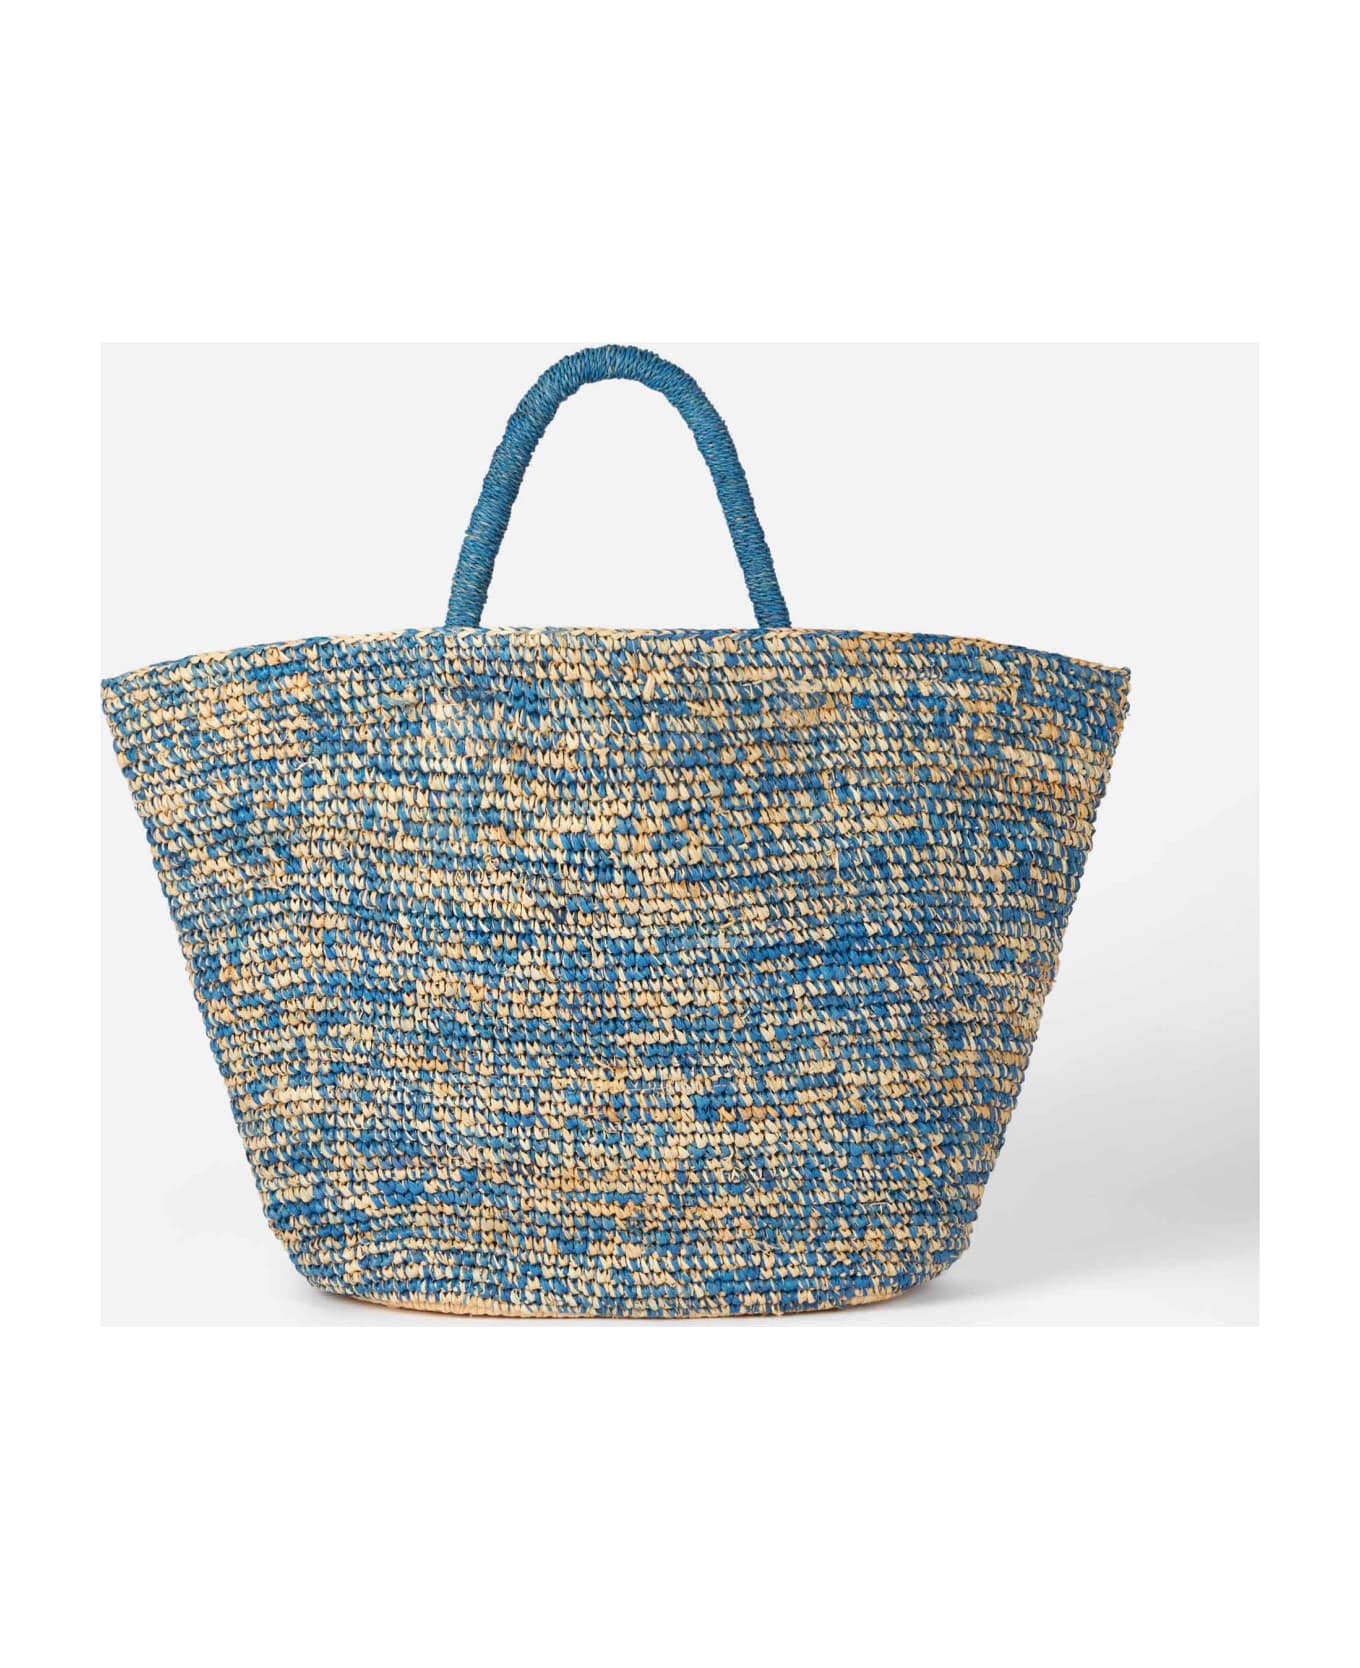 MC2 Saint Barth Raffia Blue And White Bag With Front Embroidery - BLUE トートバッグ